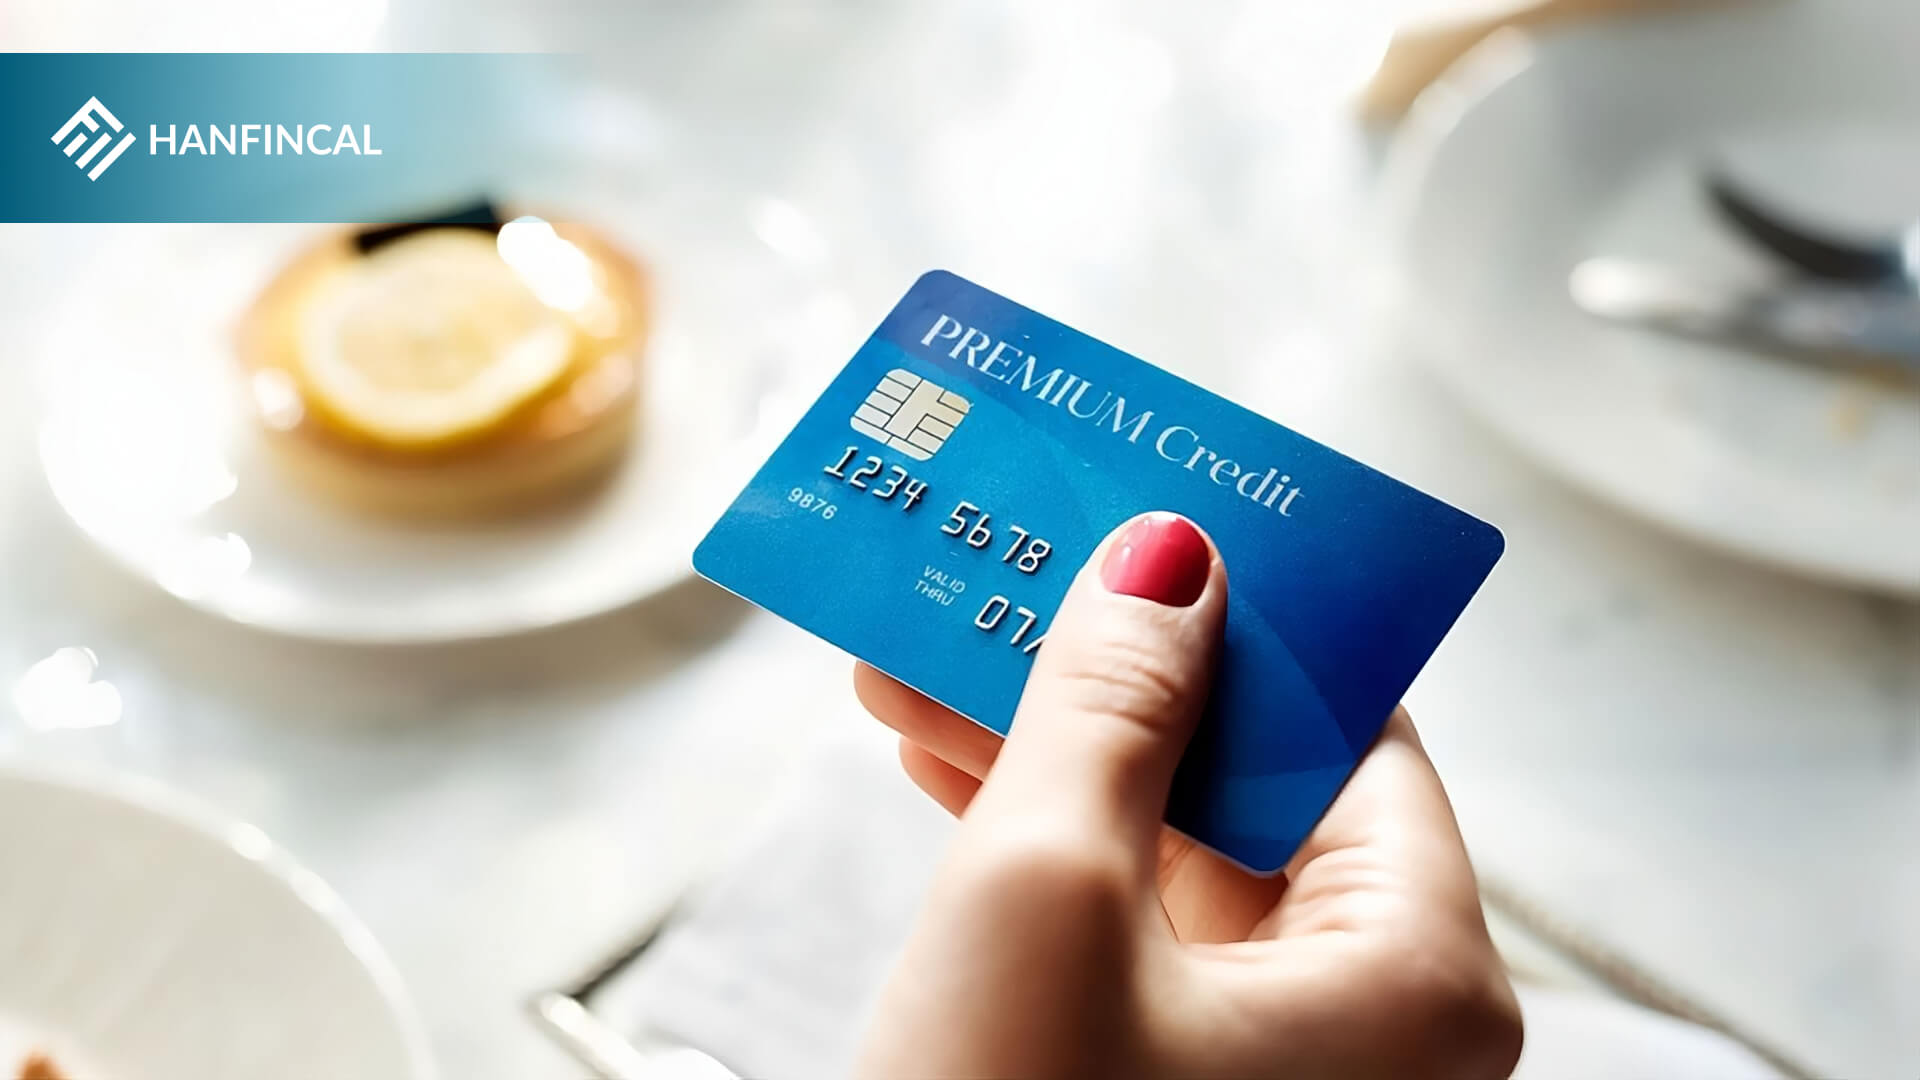 What to do when your credit card expires?